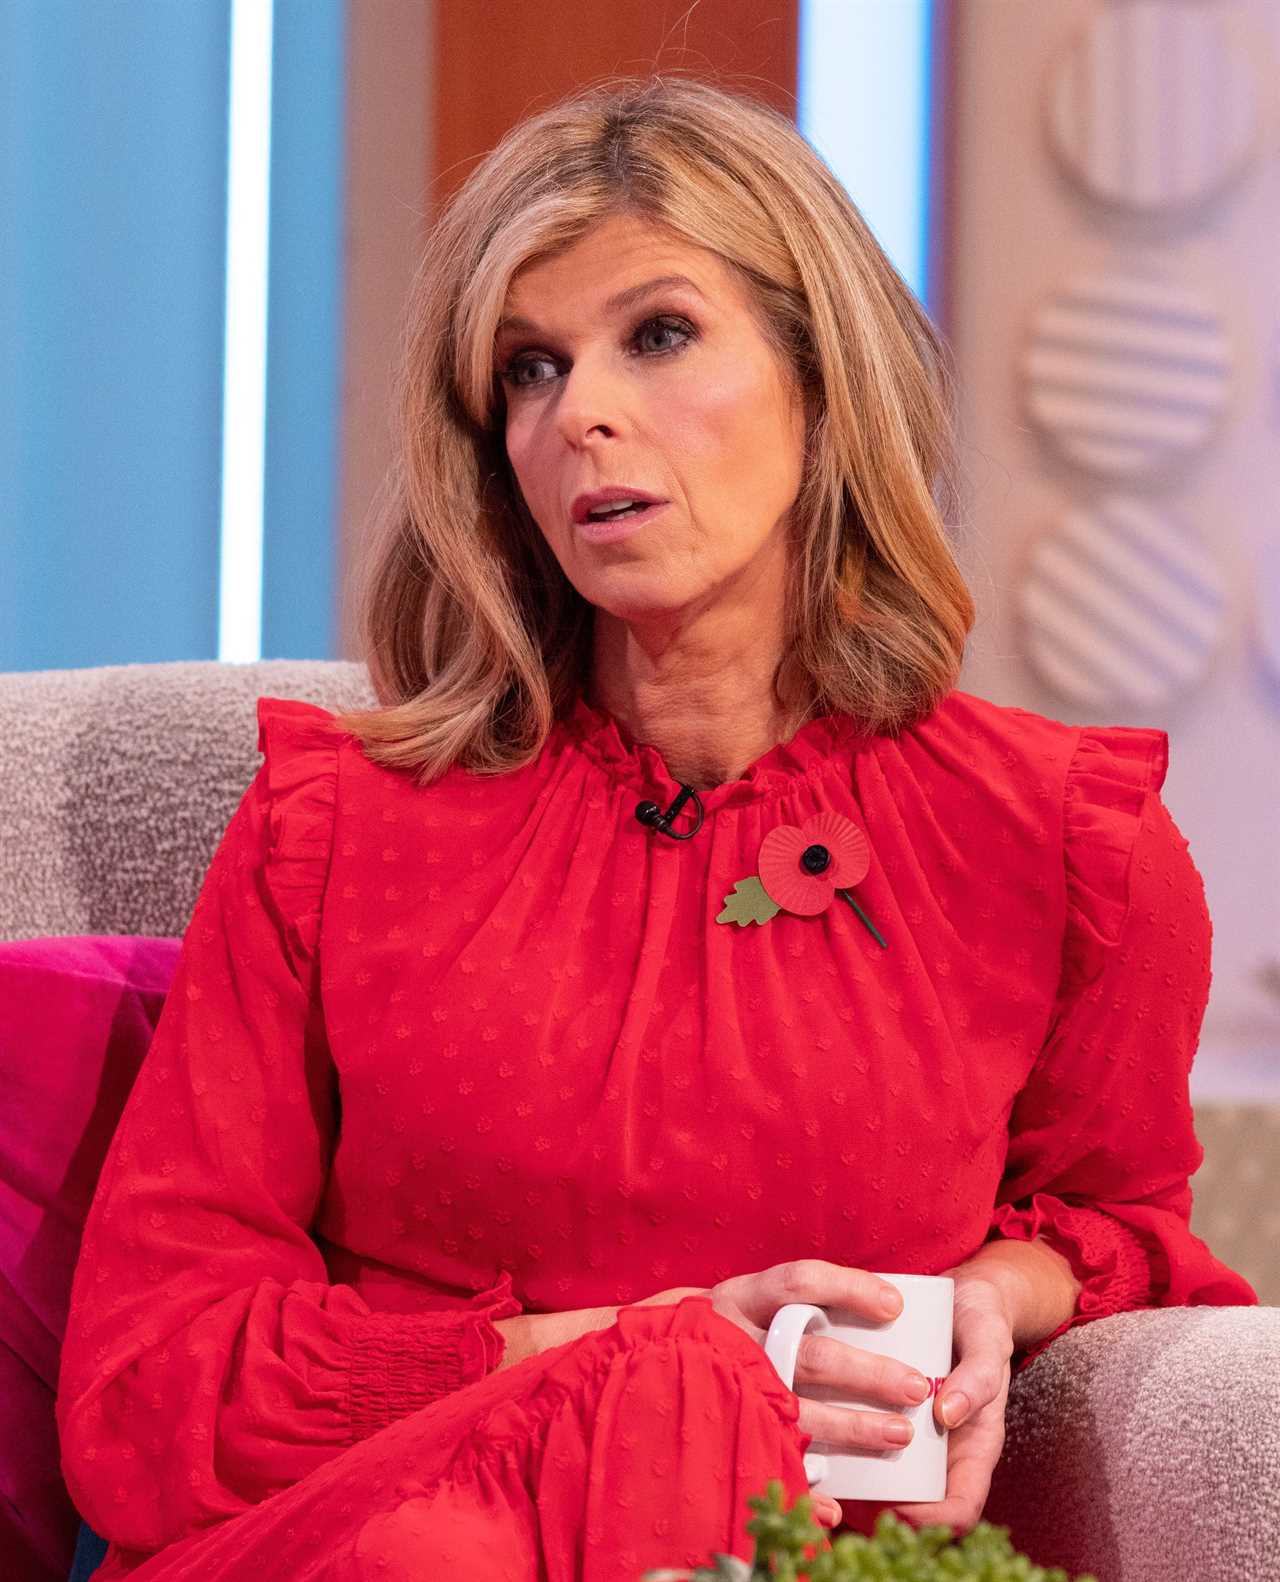 Kate has opened up on how difficult her year has been since Derek's diagnosis